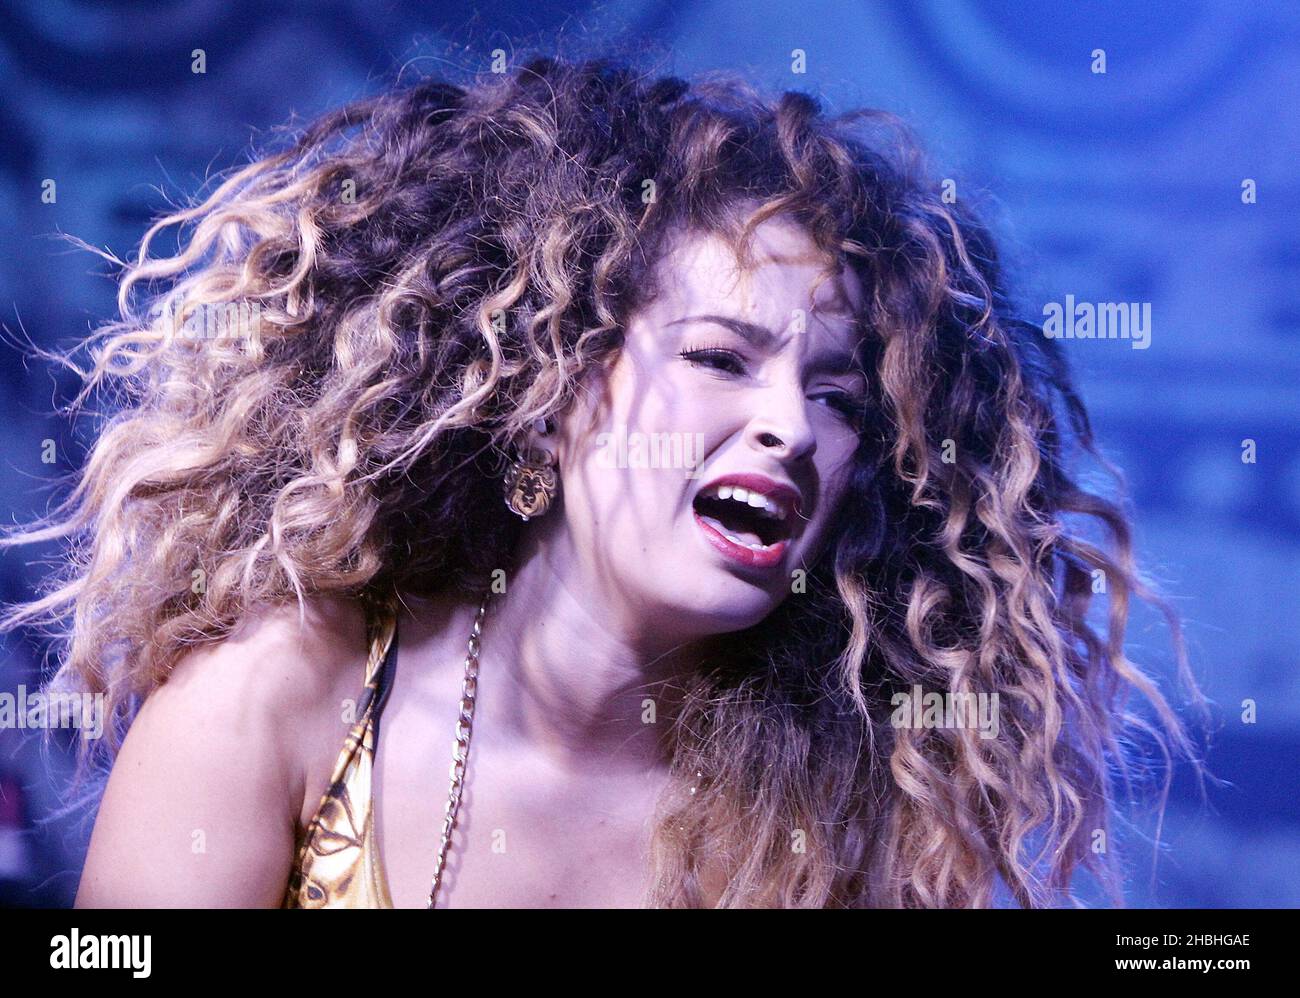 Ella Eyre performs on stage at the XOYO Club in London. Stock Photo